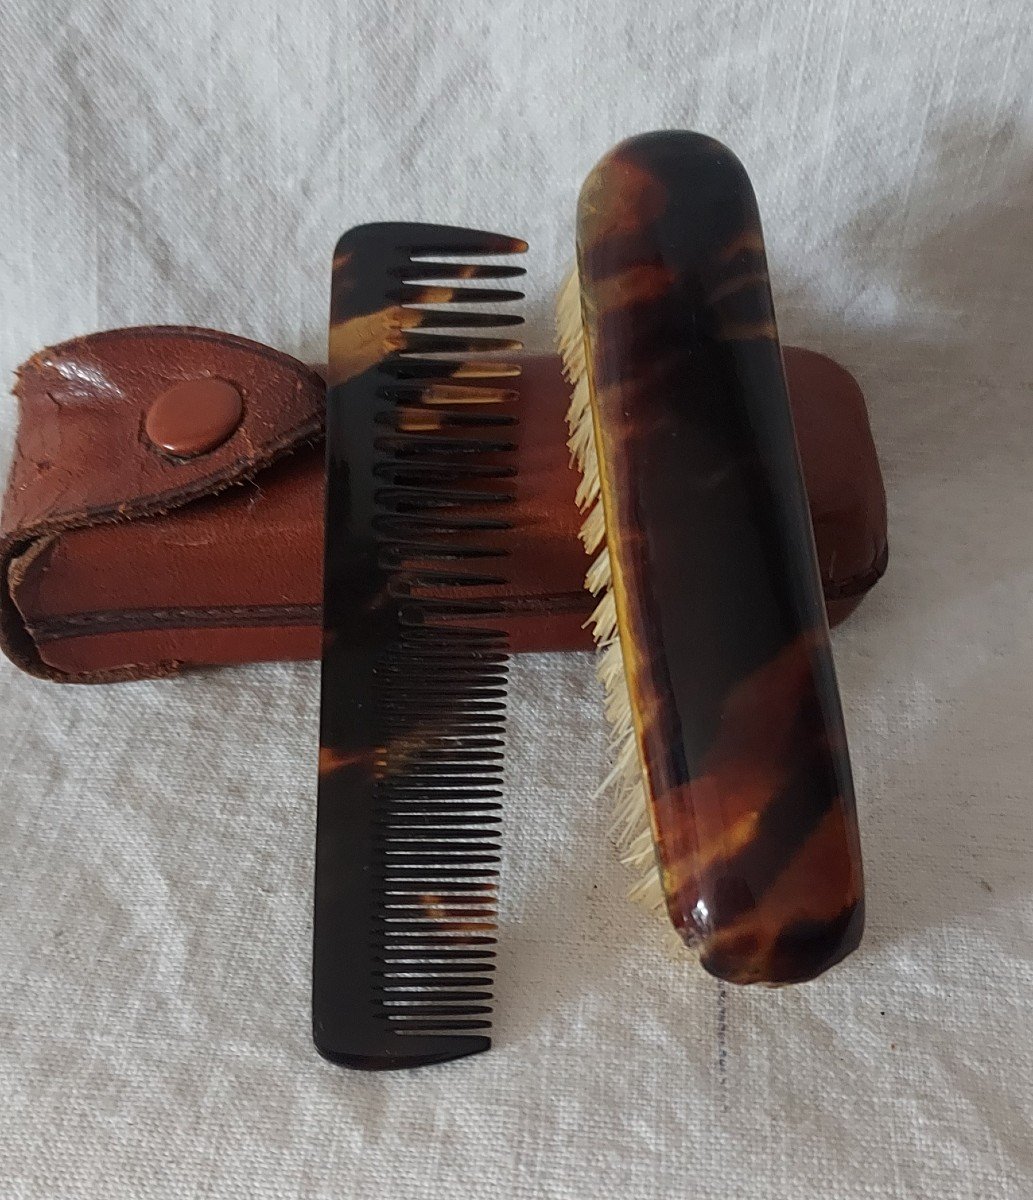 Tortoiseshell Travel Mustache Comb And Brush Accompanied By Their Leather Case -photo-4